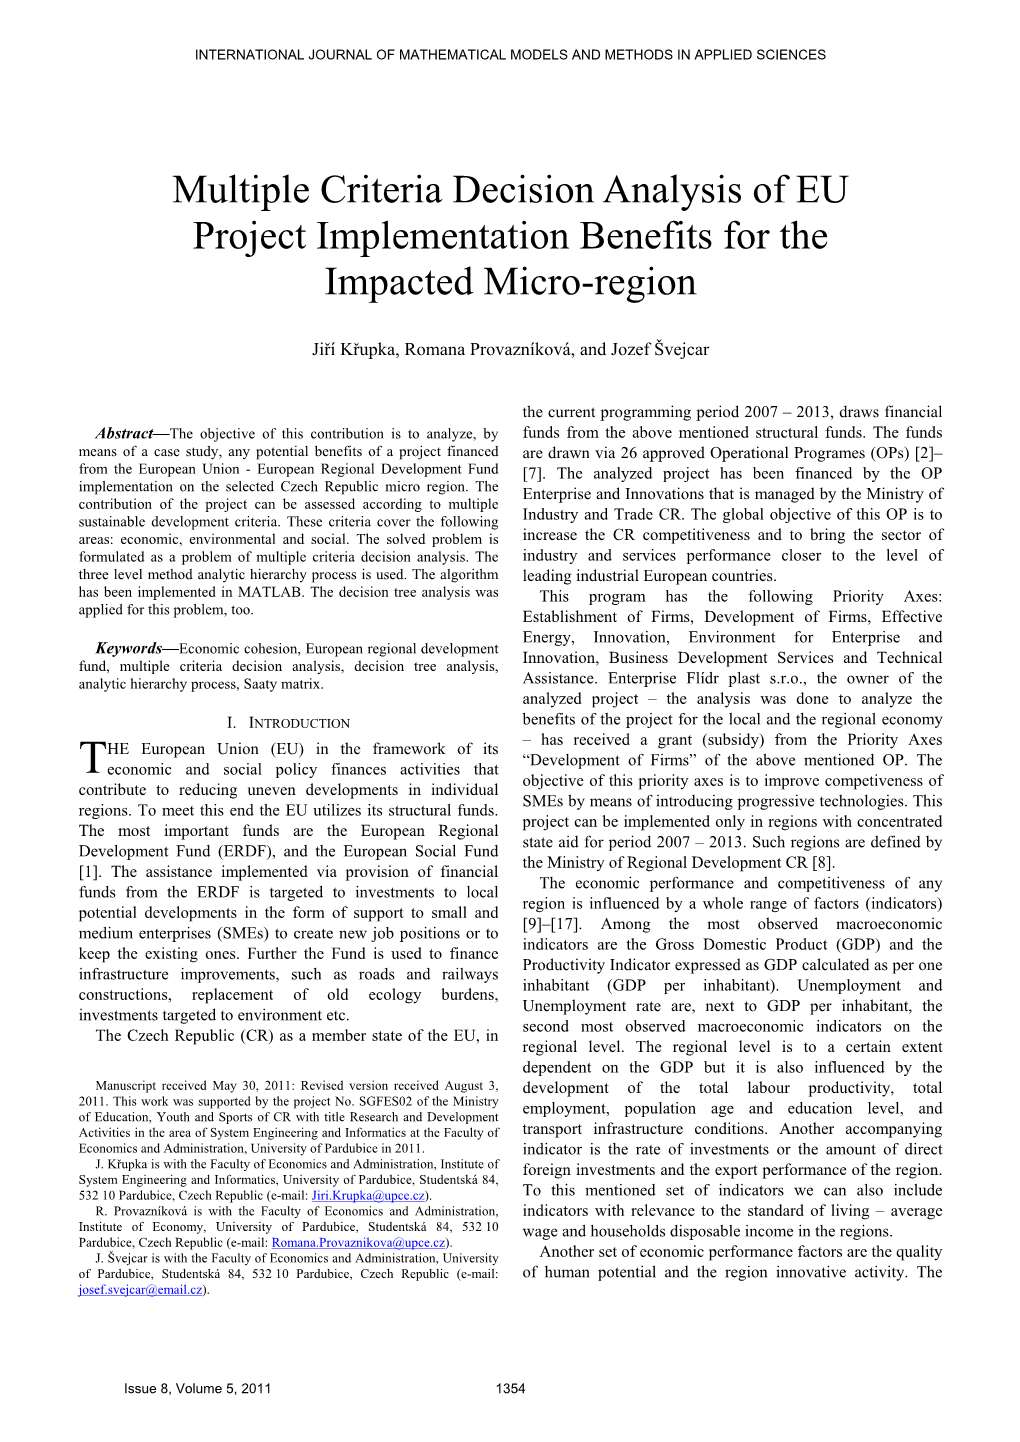 Multiple Criteria Decision Analysis of EU Project Implementation Benefits for the Impacted Micro-Region